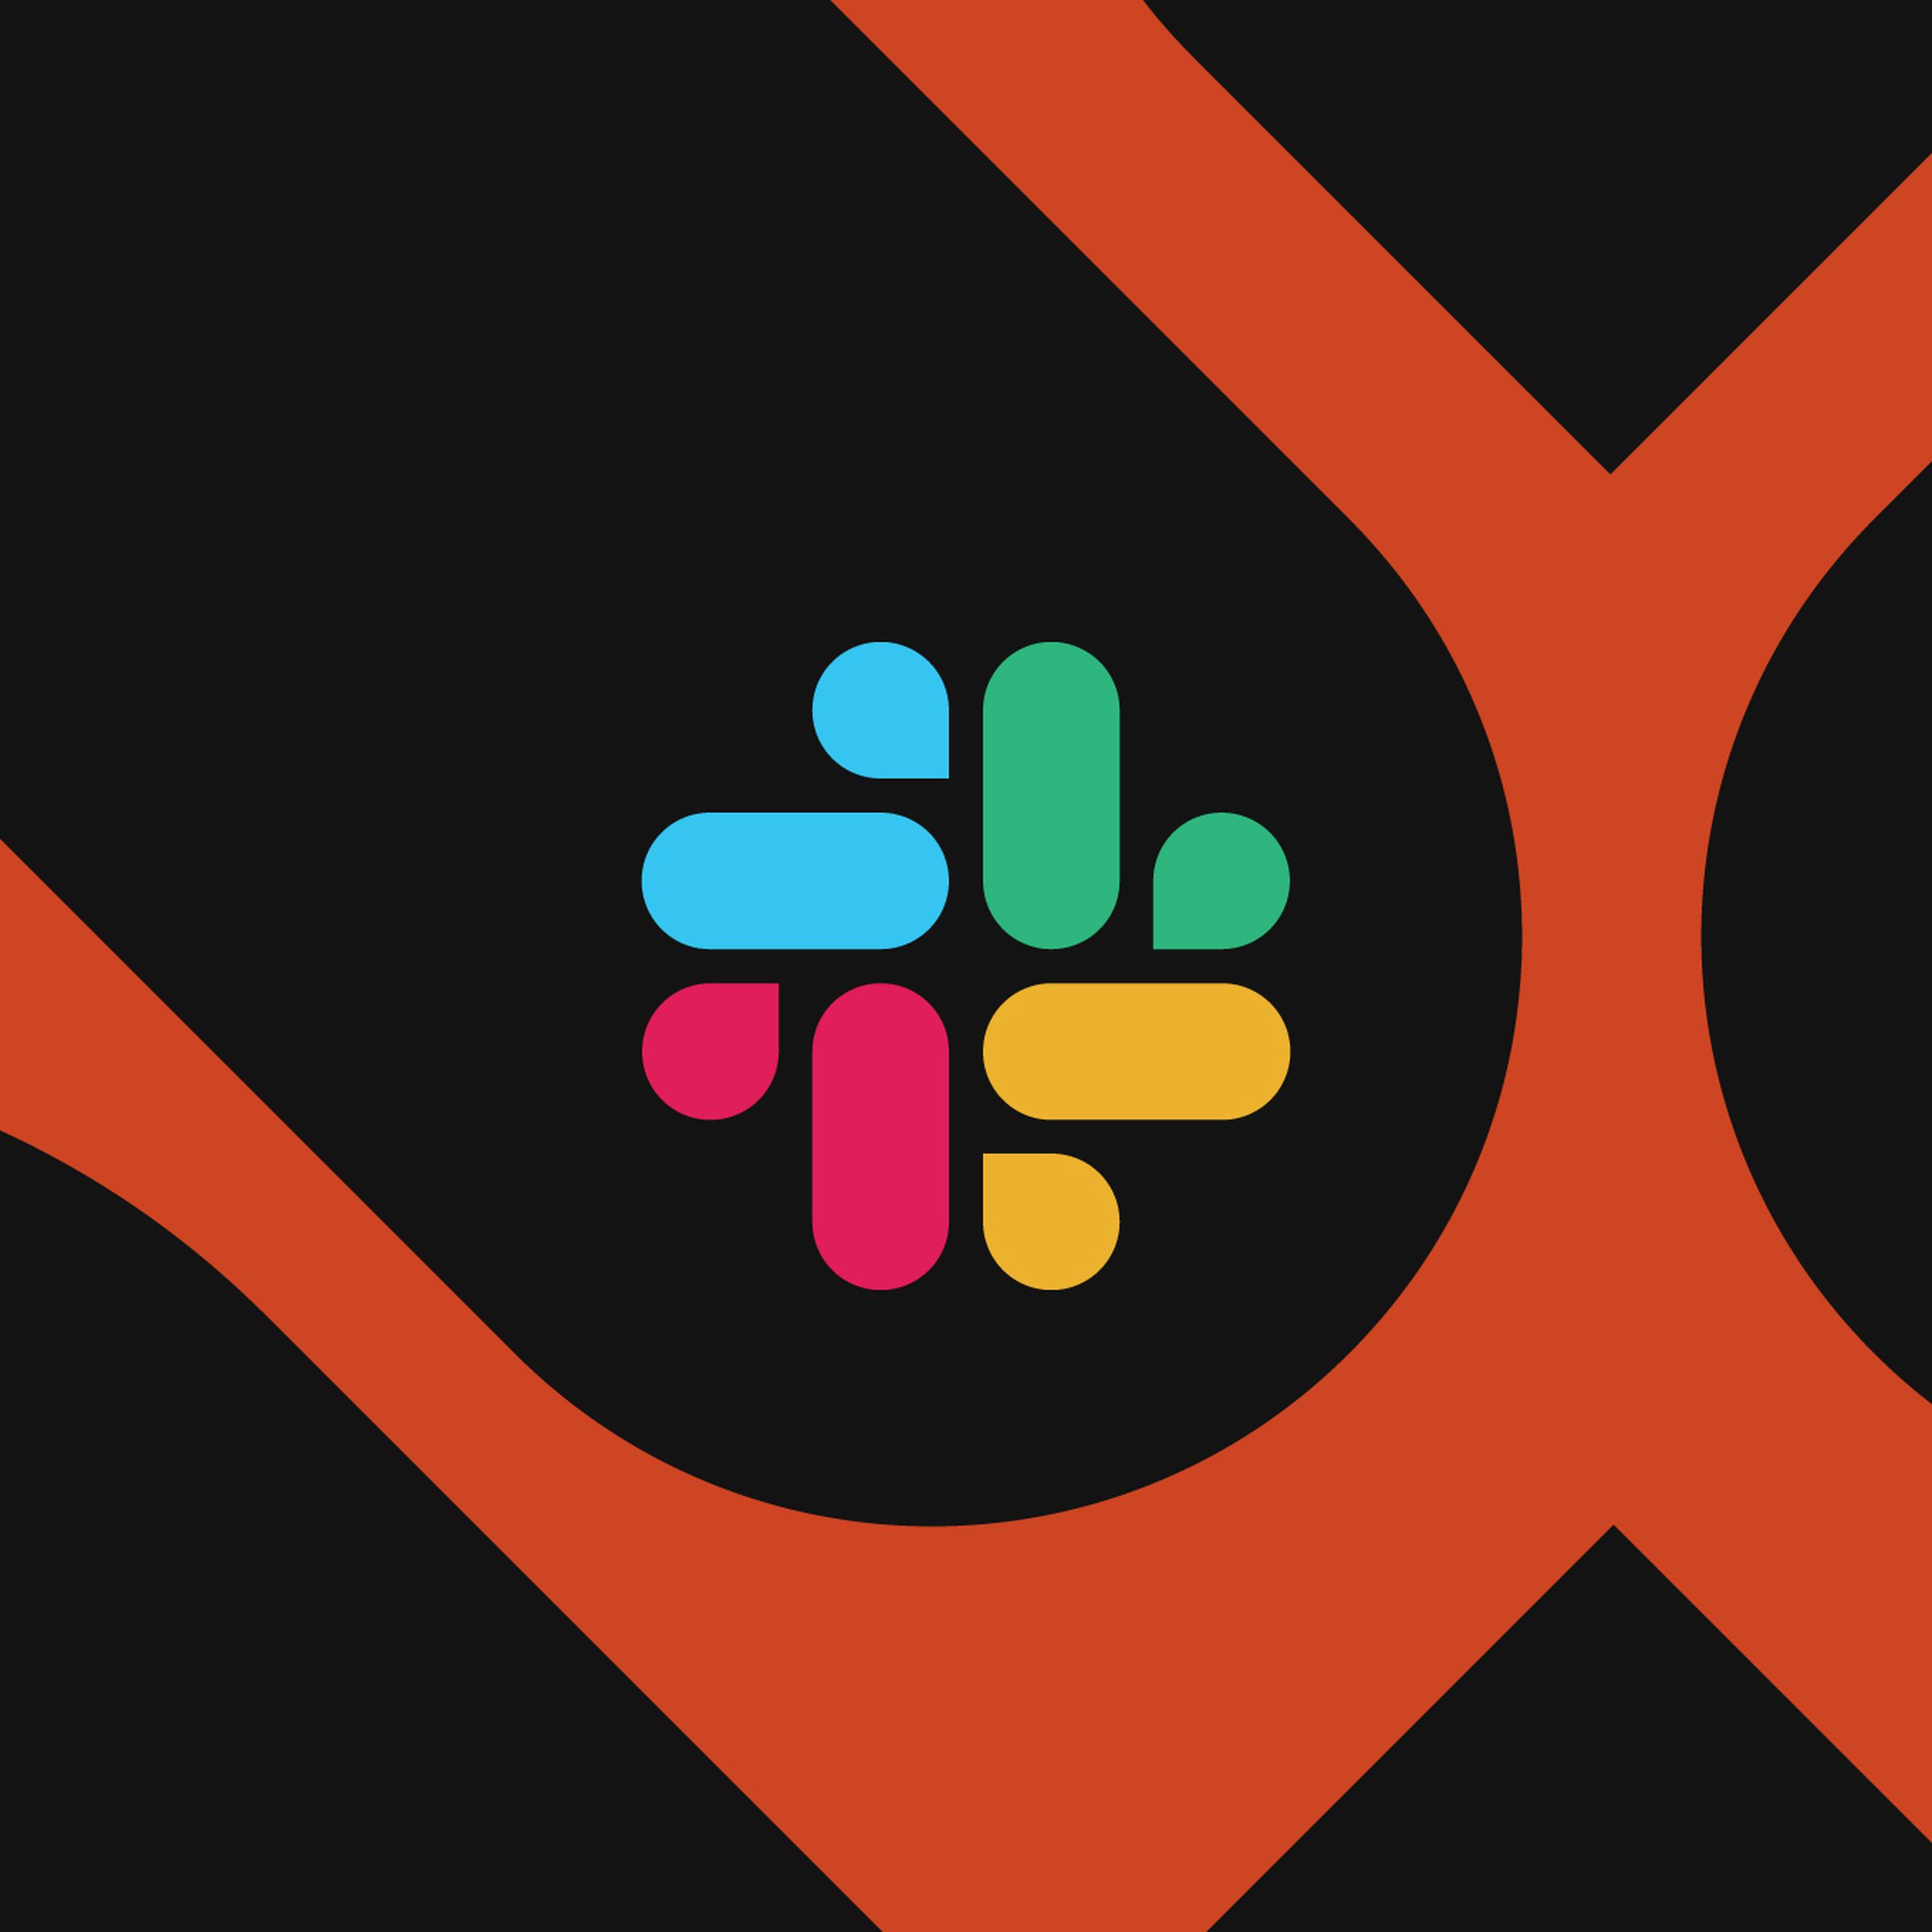 The Slack logo against a red and black backdrop.